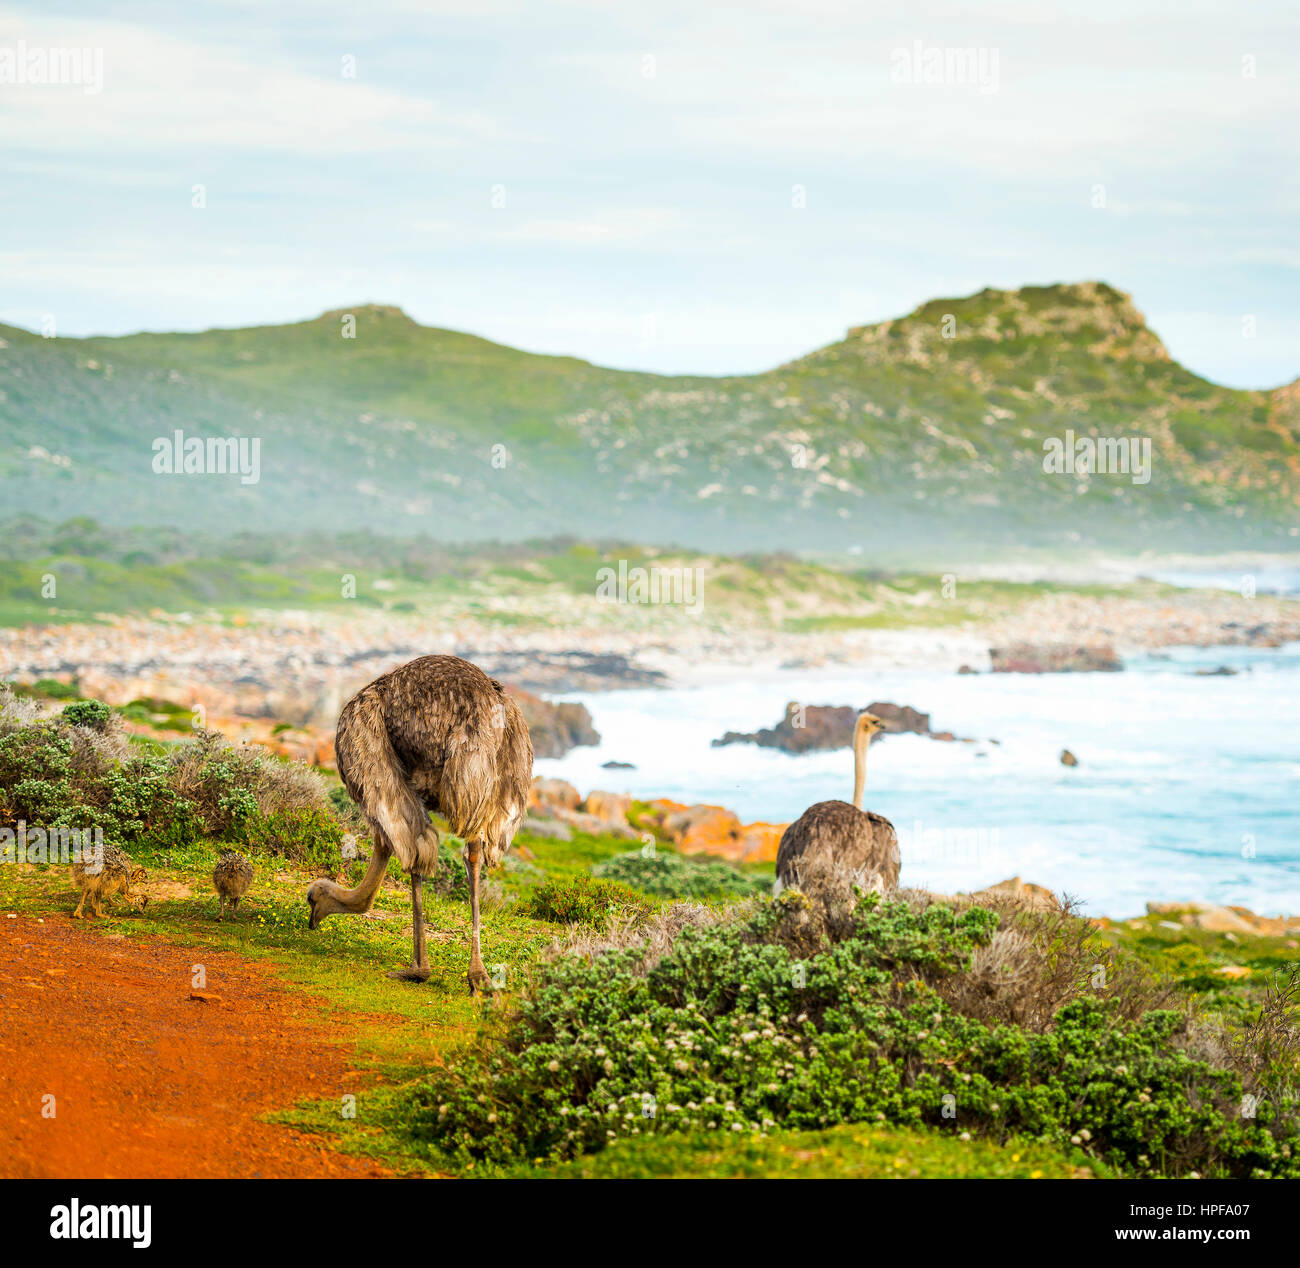 Ostrich females with offspring walk beside the ocean at the Cape of Good Hope, Cape Peninsula, South Africa Stock Photo